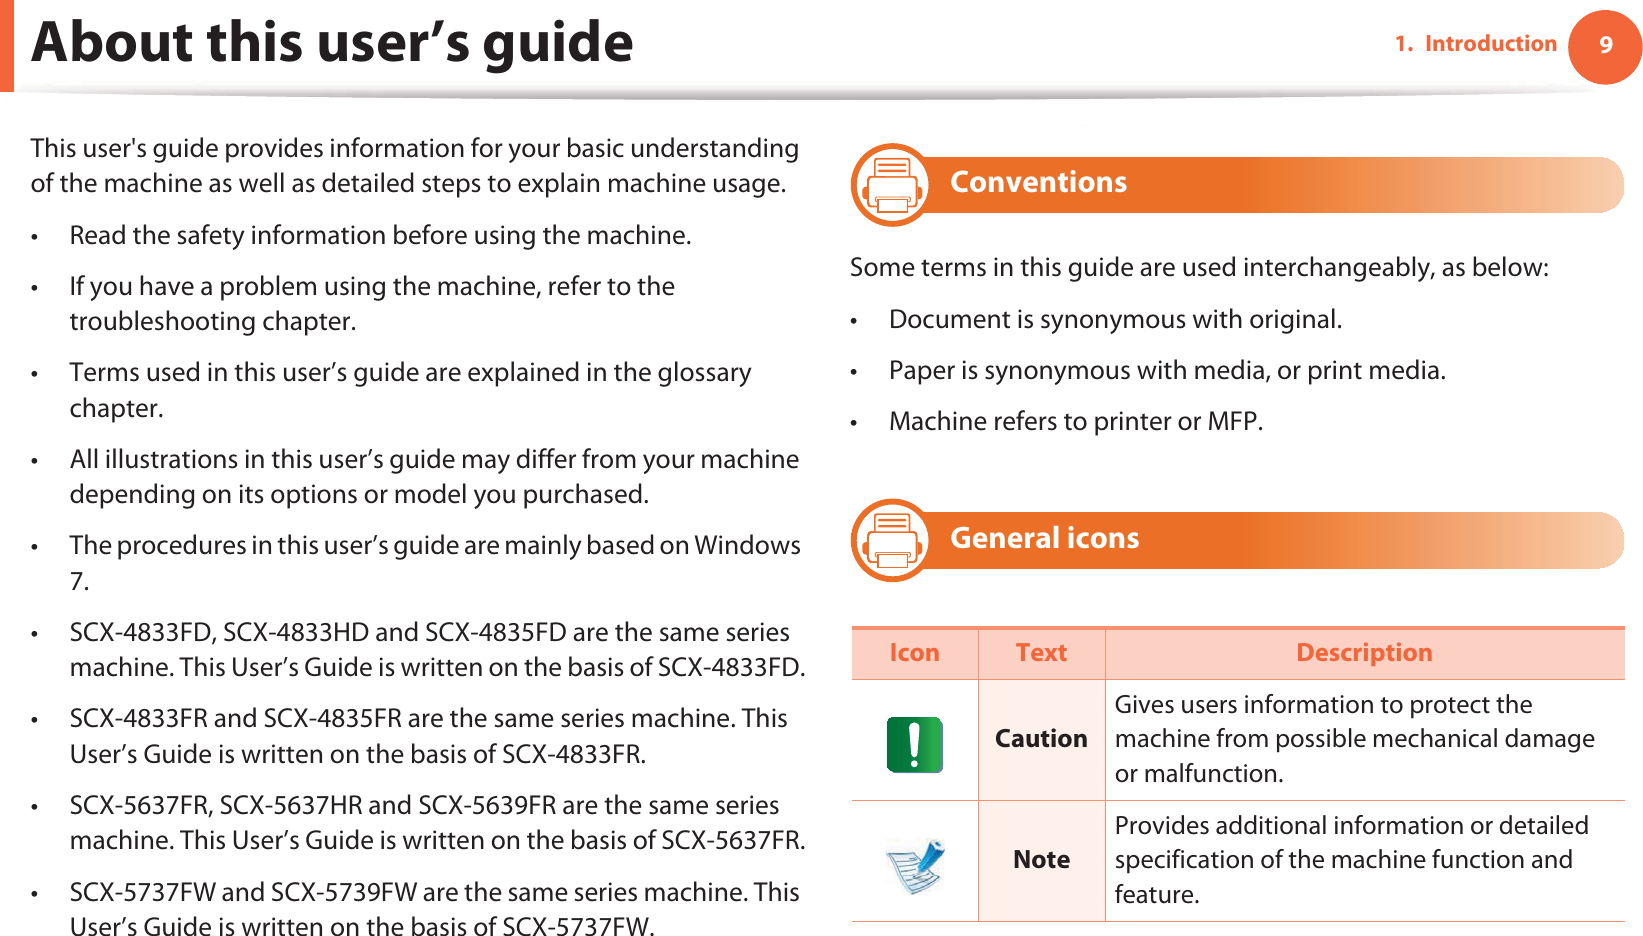 91. IntroductionAbout this user’s guideThis user&apos;s guide provides information for your basic understanding of the machine as well as detailed steps to explain machine usage.• Read the safety information before using the machine.• If you have a problem using the machine, refer to the troubleshooting chapter.• Terms used in this user’s guide are explained in the glossary chapter.• All illustrations in this user’s guide may differ from your machine depending on its options or model you purchased.• The procedures in this user’s guide are mainly based on Windows 7.• SCX-4833FD, SCX-4833HD and SCX-4835FD are the same series machine. This User’s Guide is written on the basis of SCX-4833FD.• SCX-4833FR and SCX-4835FR are the same series machine. This User’s Guide is written on the basis of SCX-4833FR.• SCX-5637FR, SCX-5637HR and SCX-5639FR are the same series machine. This User’s Guide is written on the basis of SCX-5637FR.• SCX-5737FW and SCX-5739FW are the same series machine. This User’s Guide is written on the basis of SCX-5737FW.1 ConventionsSome terms in this guide are used interchangeably, as below:• Document is synonymous with original.• Paper is synonymous with media, or print media.• Machine refers to printer or MFP.2 General iconsIcon Text DescriptionCautionGives users information to protect the machine from possible mechanical damage or malfunction.NoteProvides additional information or detailed specification of the machine function and feature.